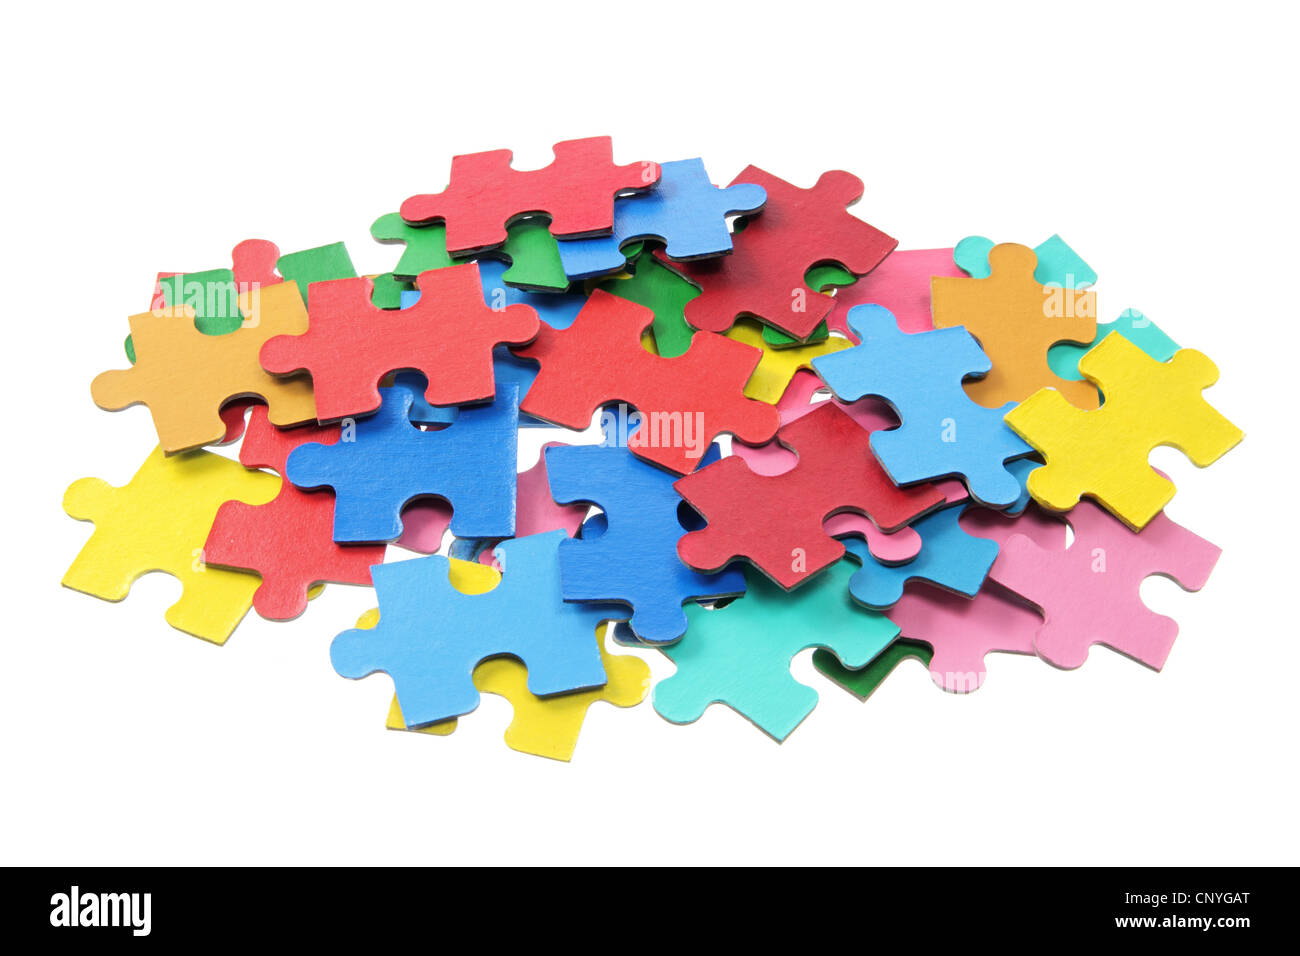 Pile of Jigsaw Puzzle Pieces Stock Photo